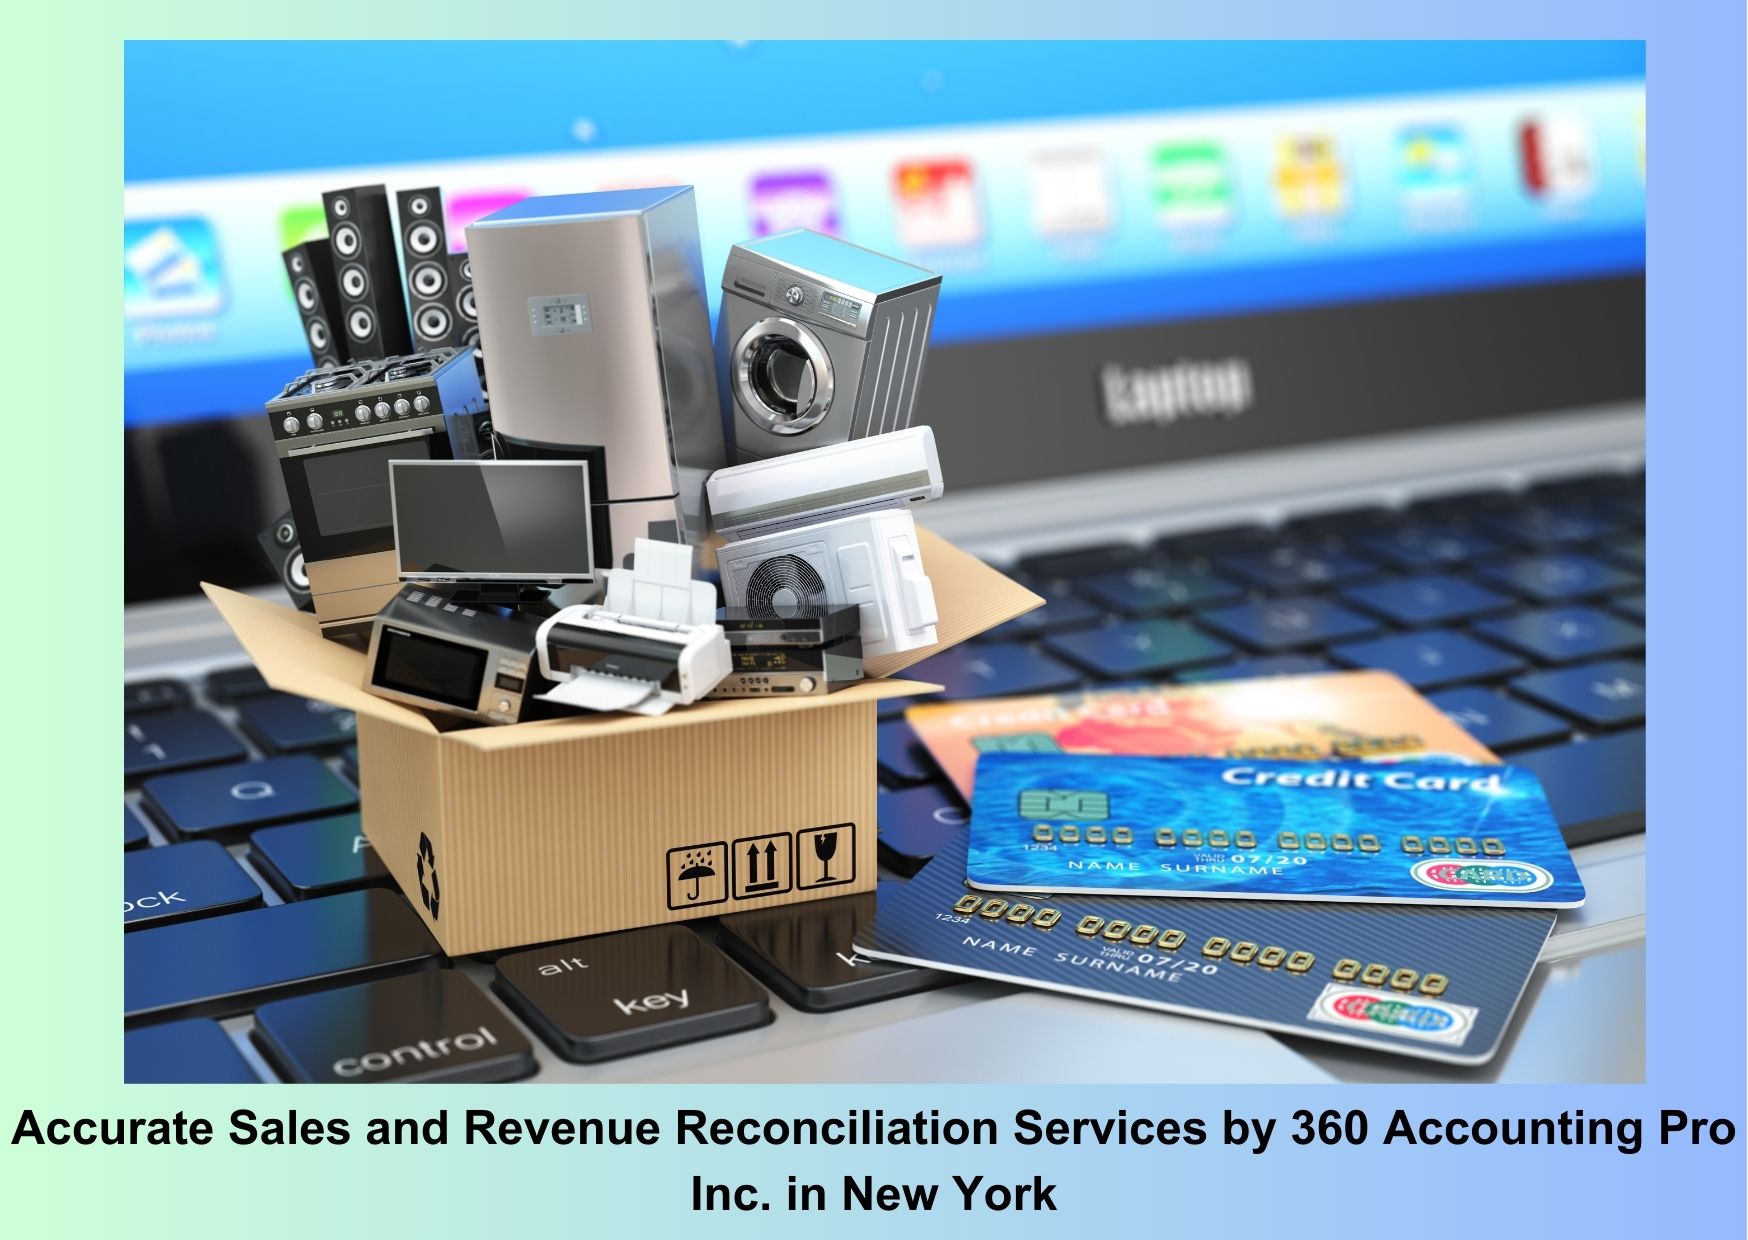 Accurate Sales and Revenue Reconciliation Services by 360 Accounting Pro Inc. in New York